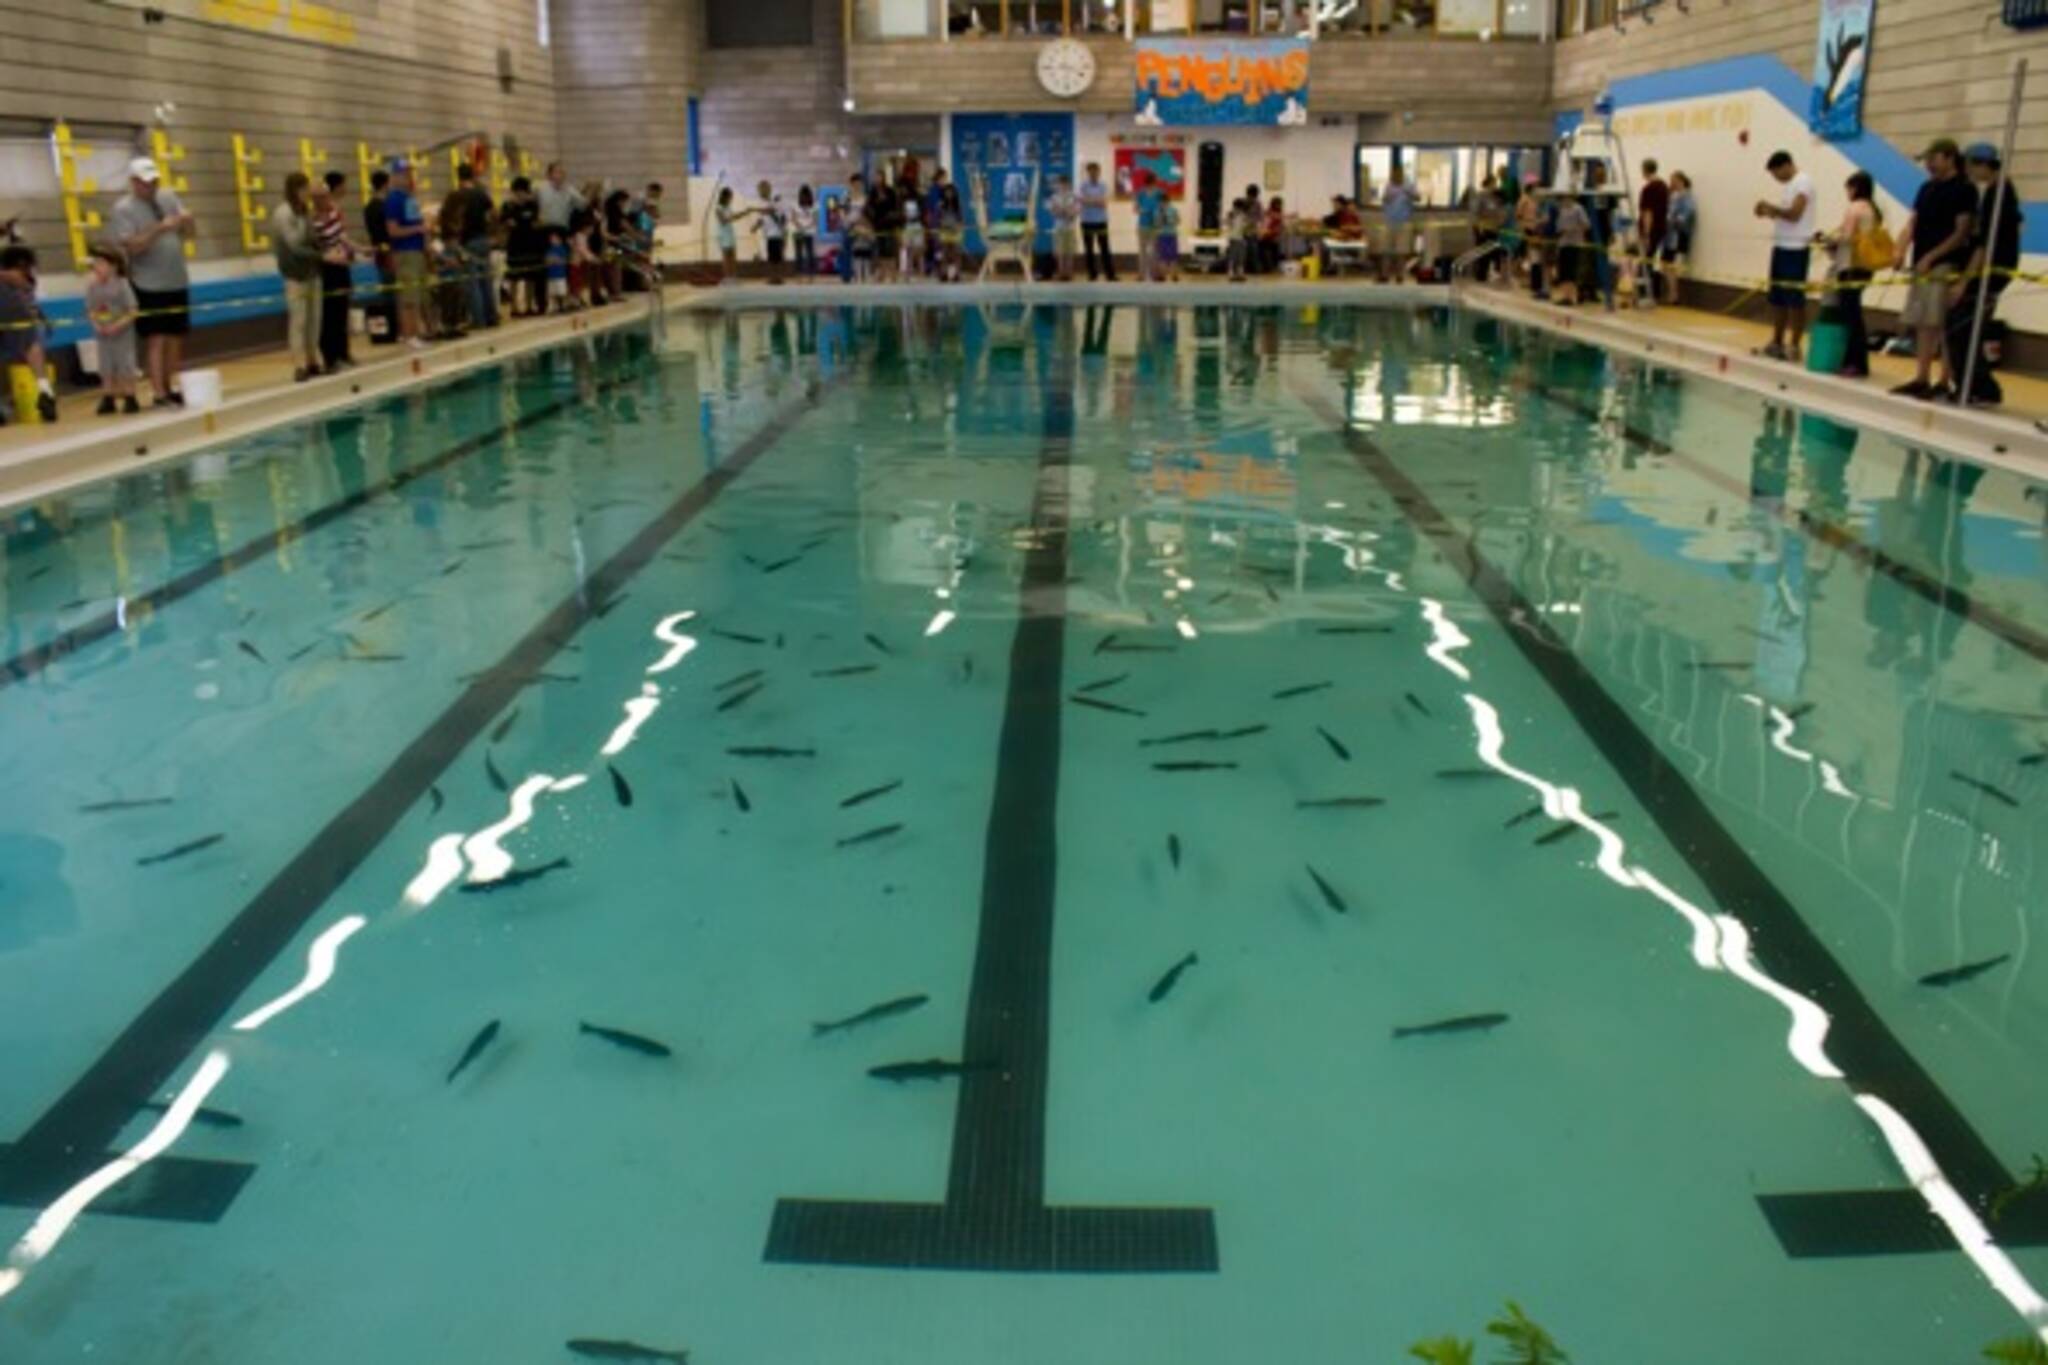 Indoor fishing in Toronto (in a swimming pool)